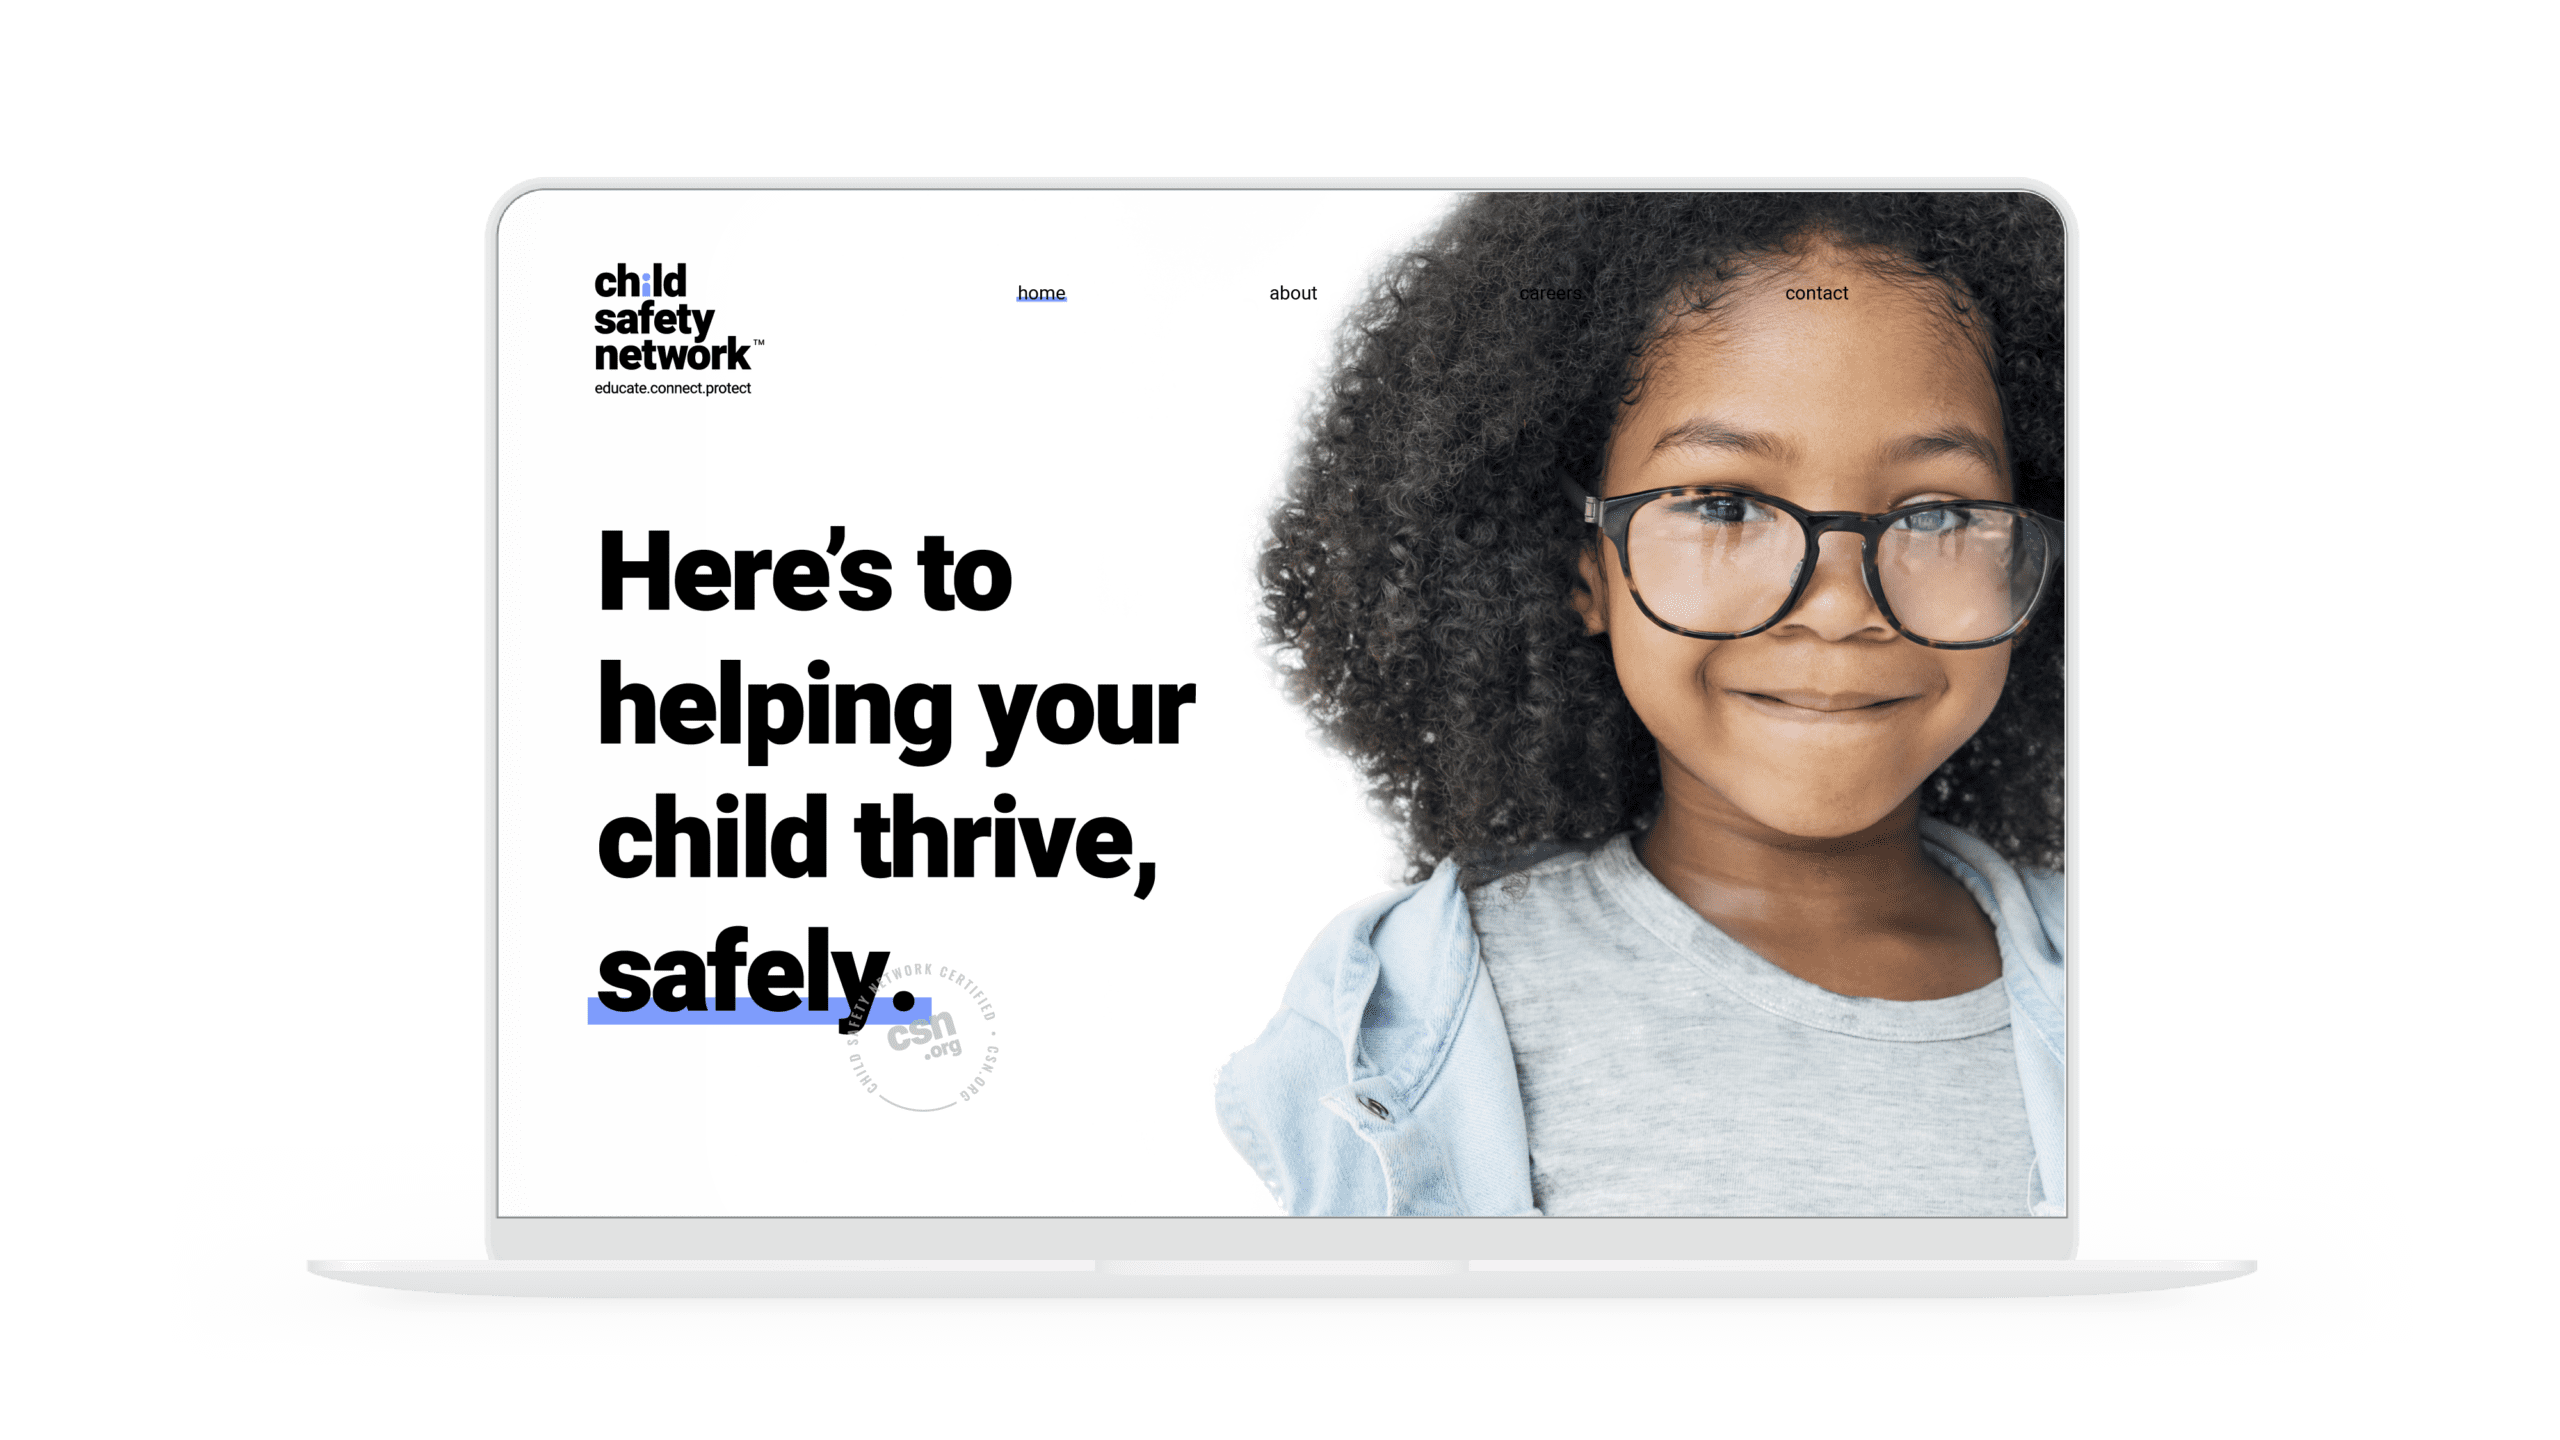 child safety network social impact design firm work